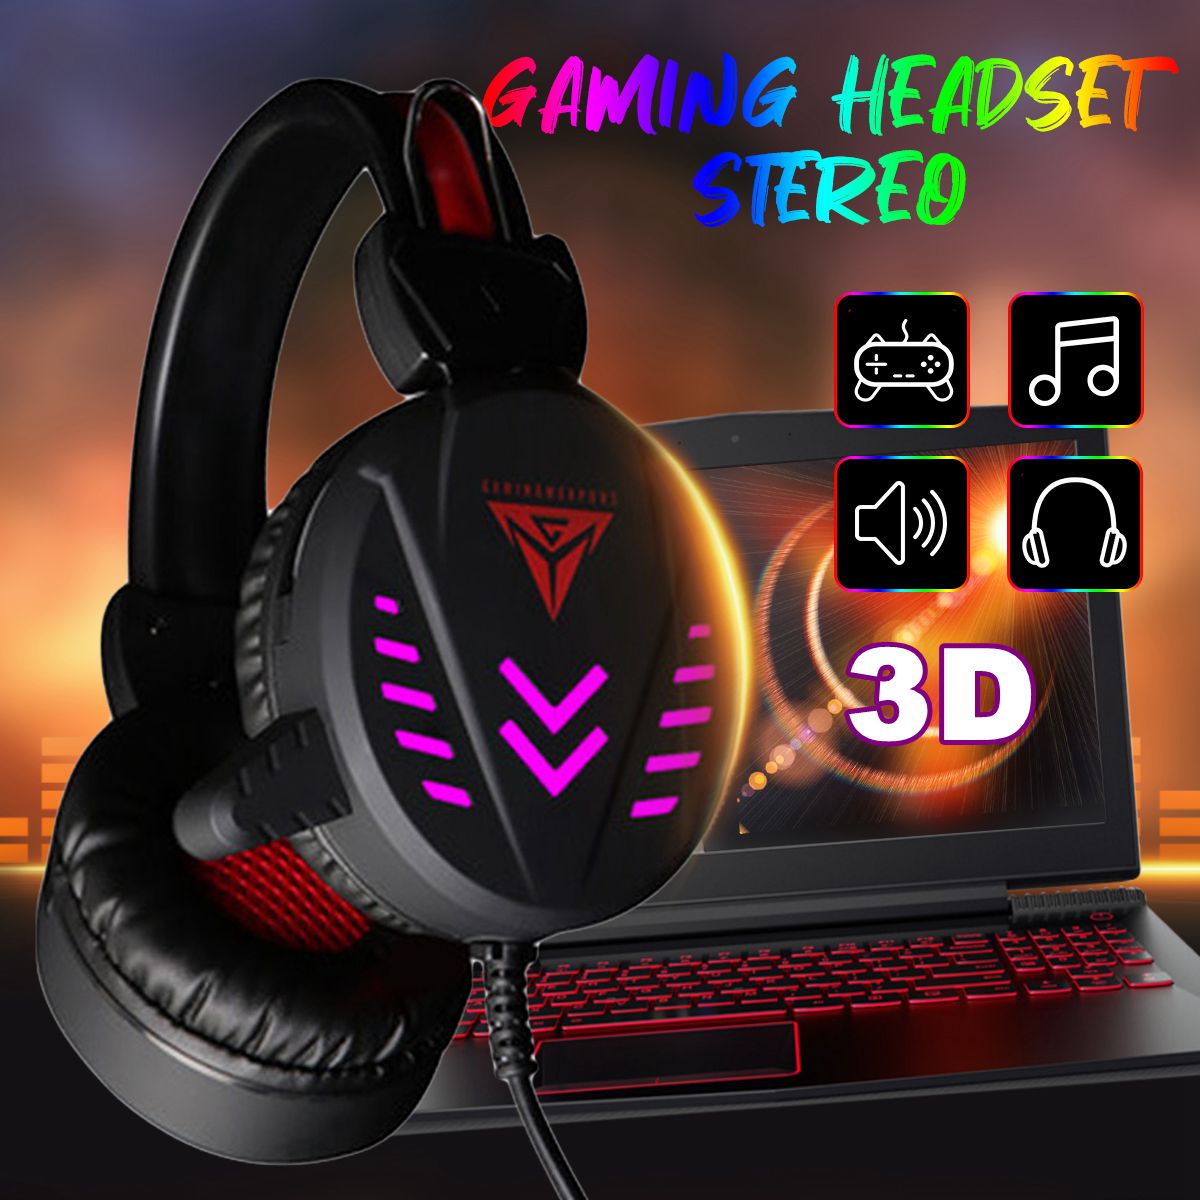 Bakeey-35mm-Super-Pass-Gaming-Headset-Stereo-LED-Colorful-Breathing-Lamp-Earphone-Hifi-Heavy-Bass-Ga-1593352-2